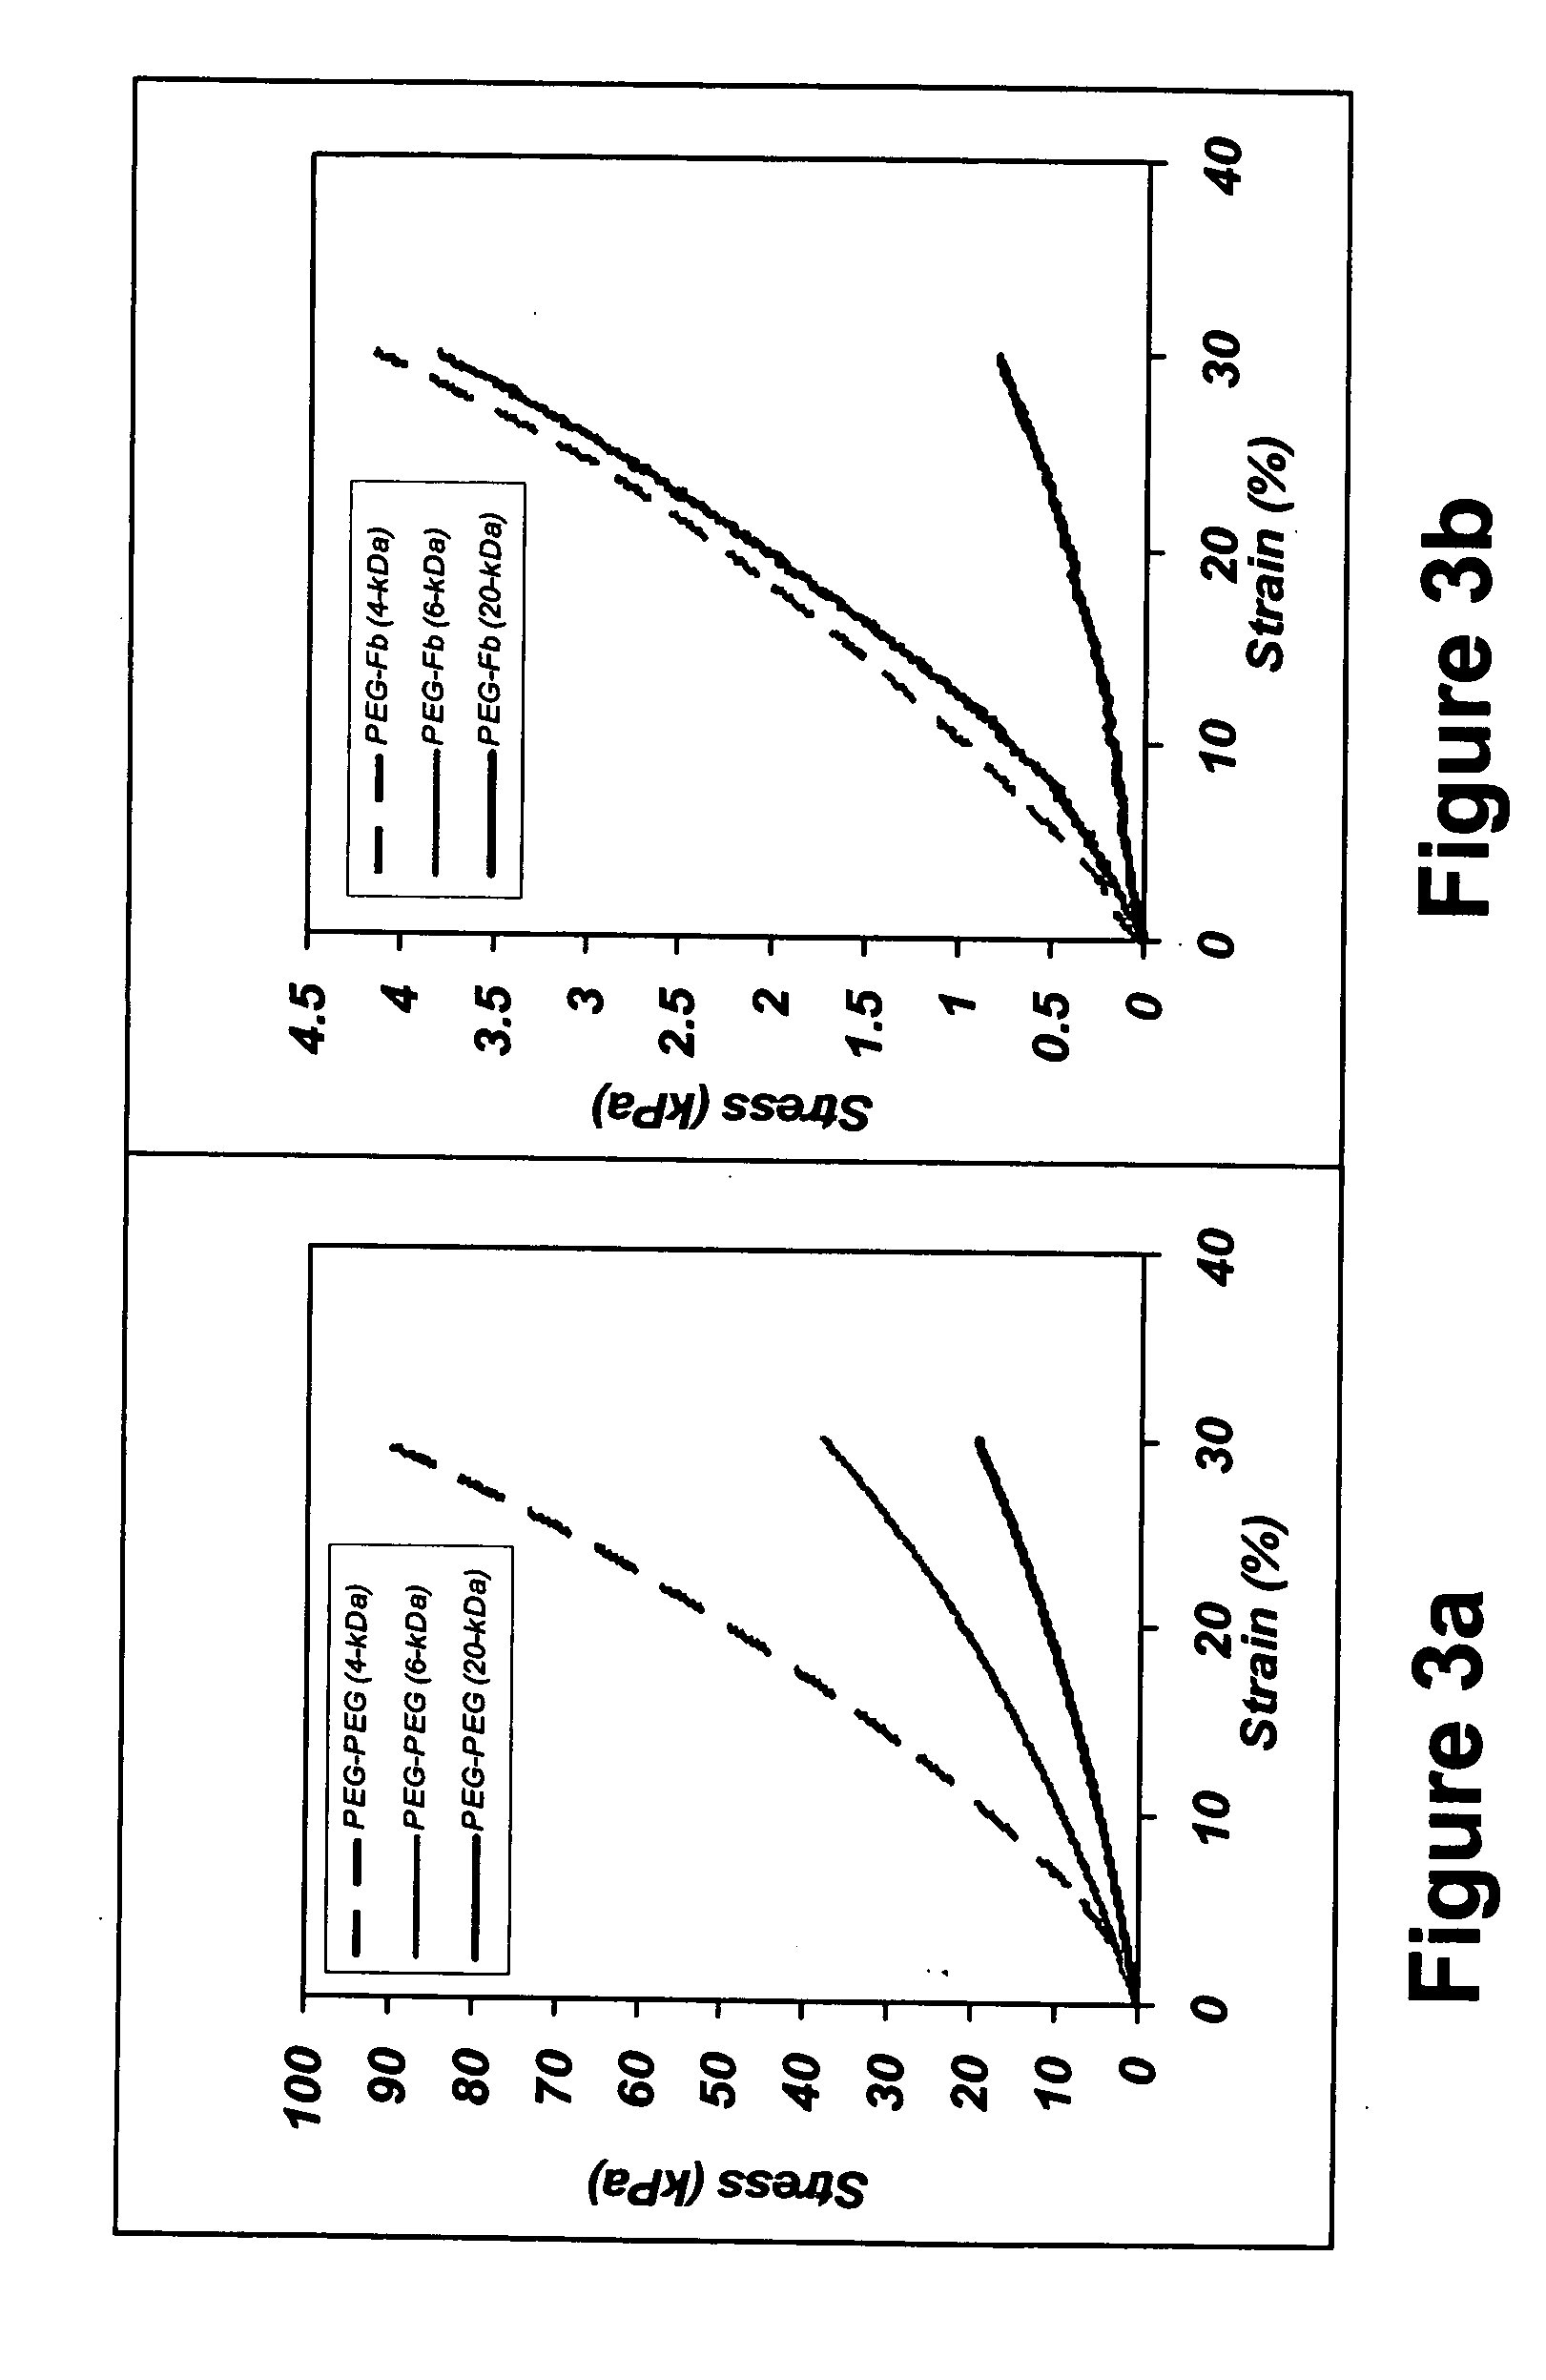 Matrix composed of a naturally-occurring protein backbone cross linked by a synthetic polymer and methods of generating and using same